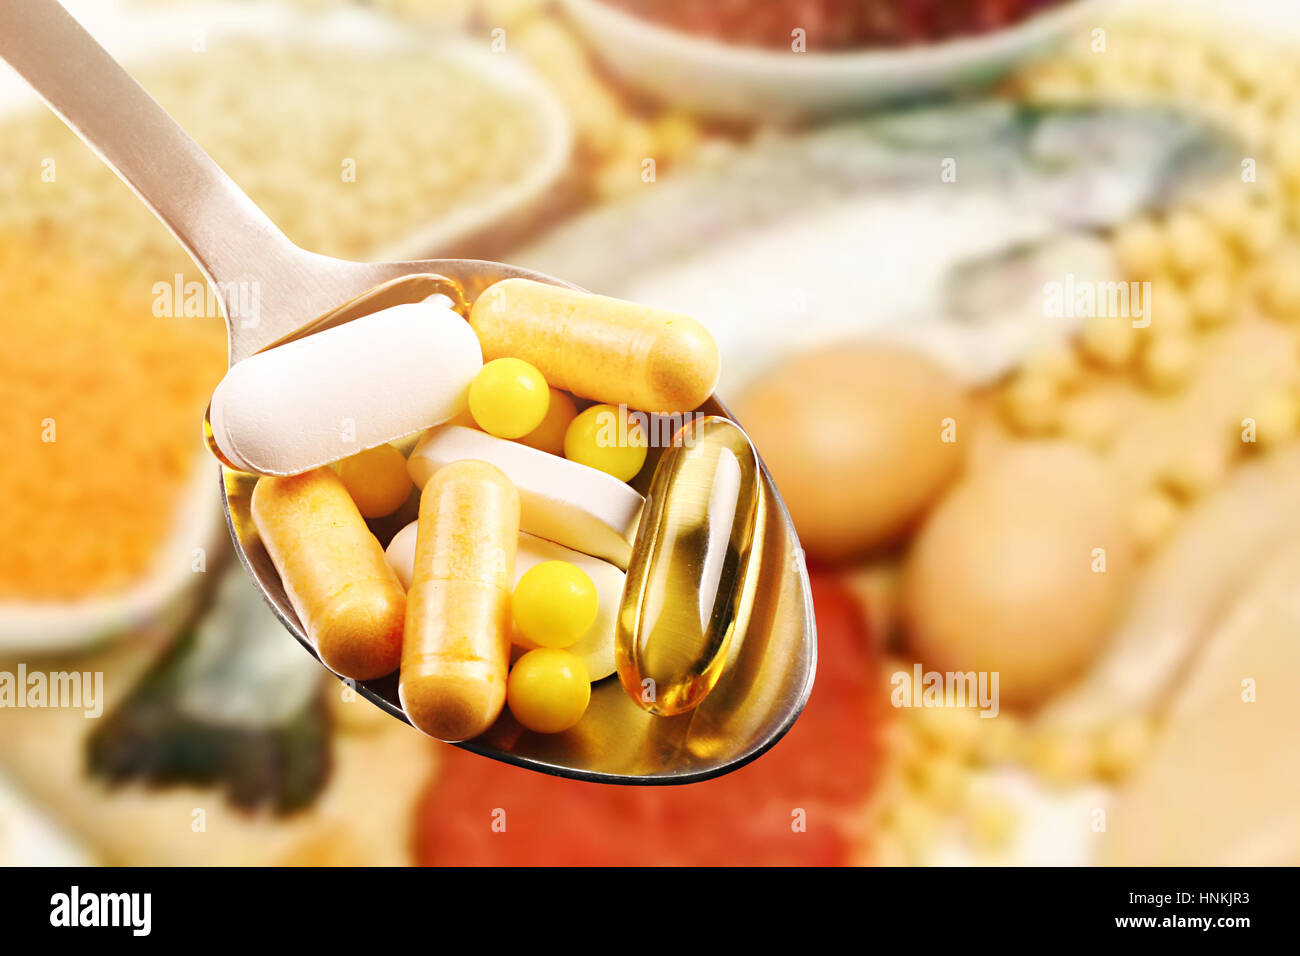 dietary supplements in spoon on protein food background Stock Photo